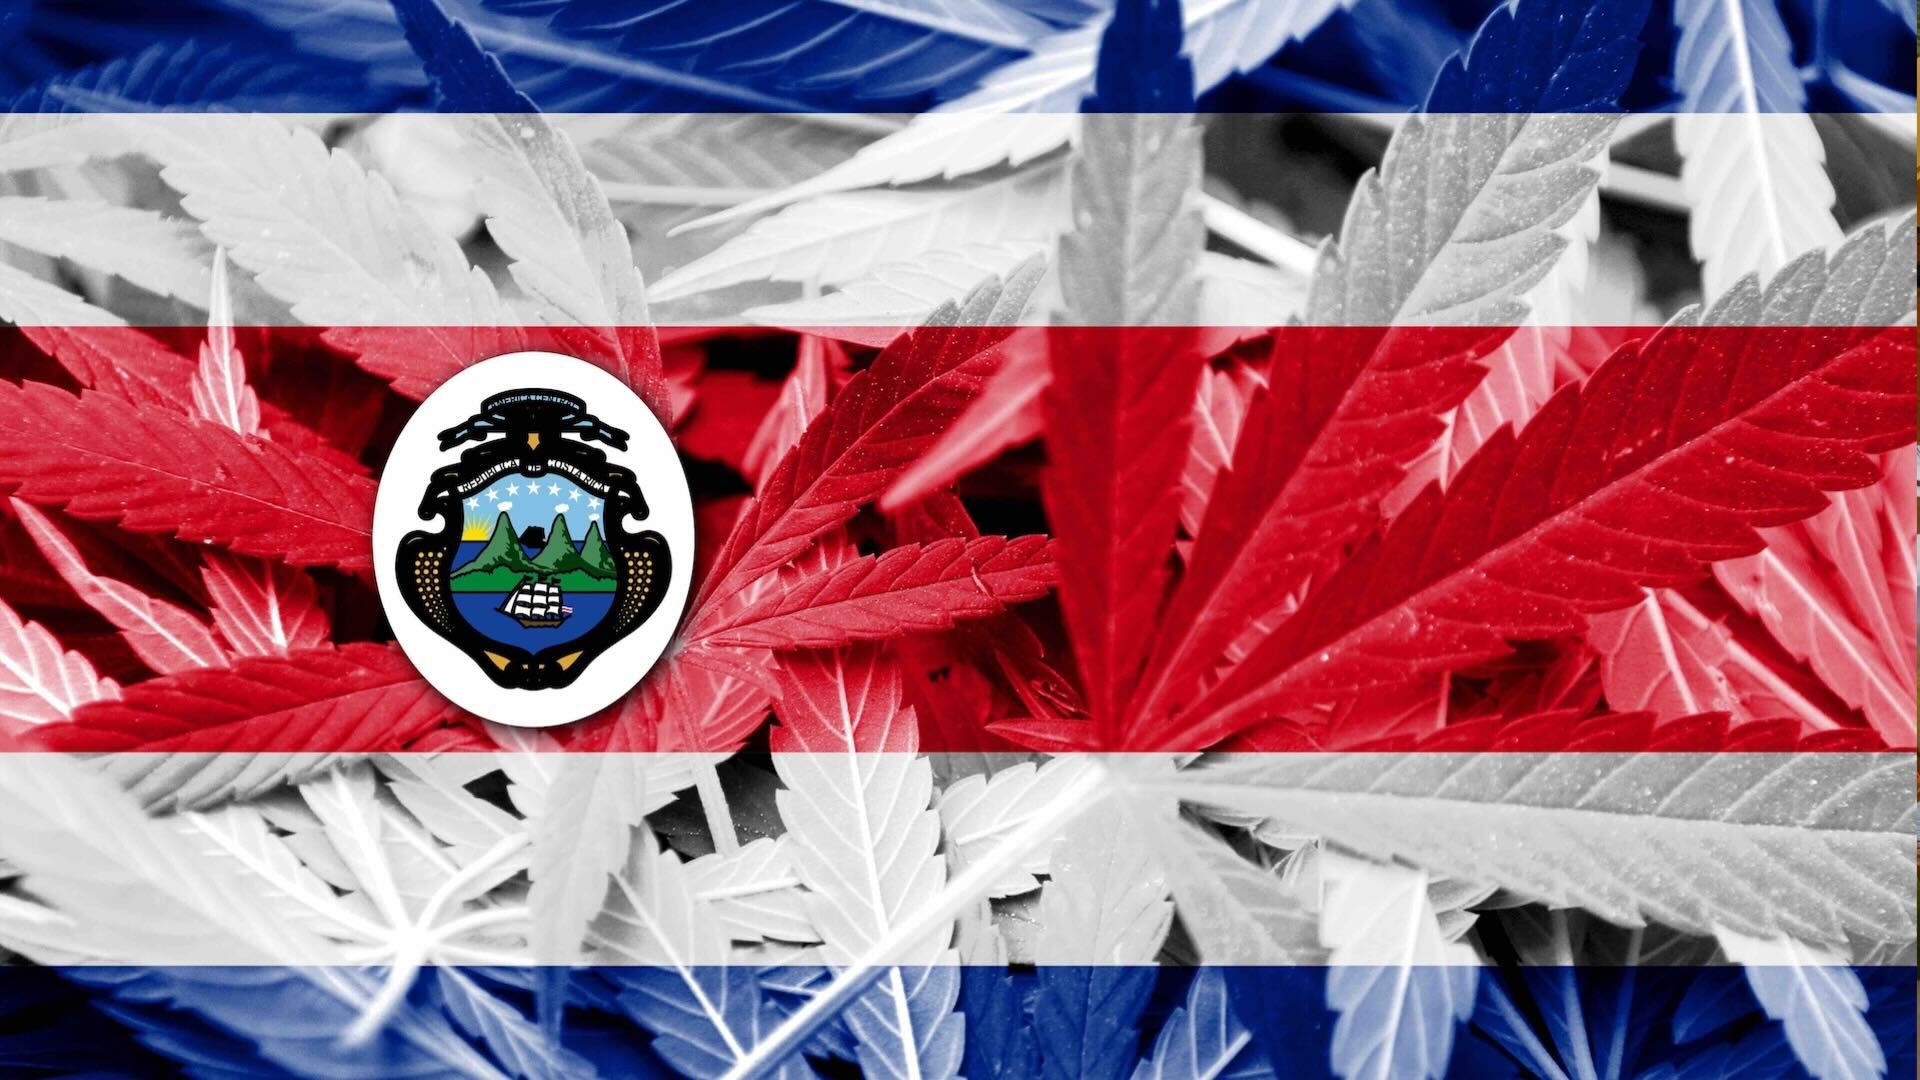 Costa Rica just legalized medical marijuana. Here’s what the new law allows